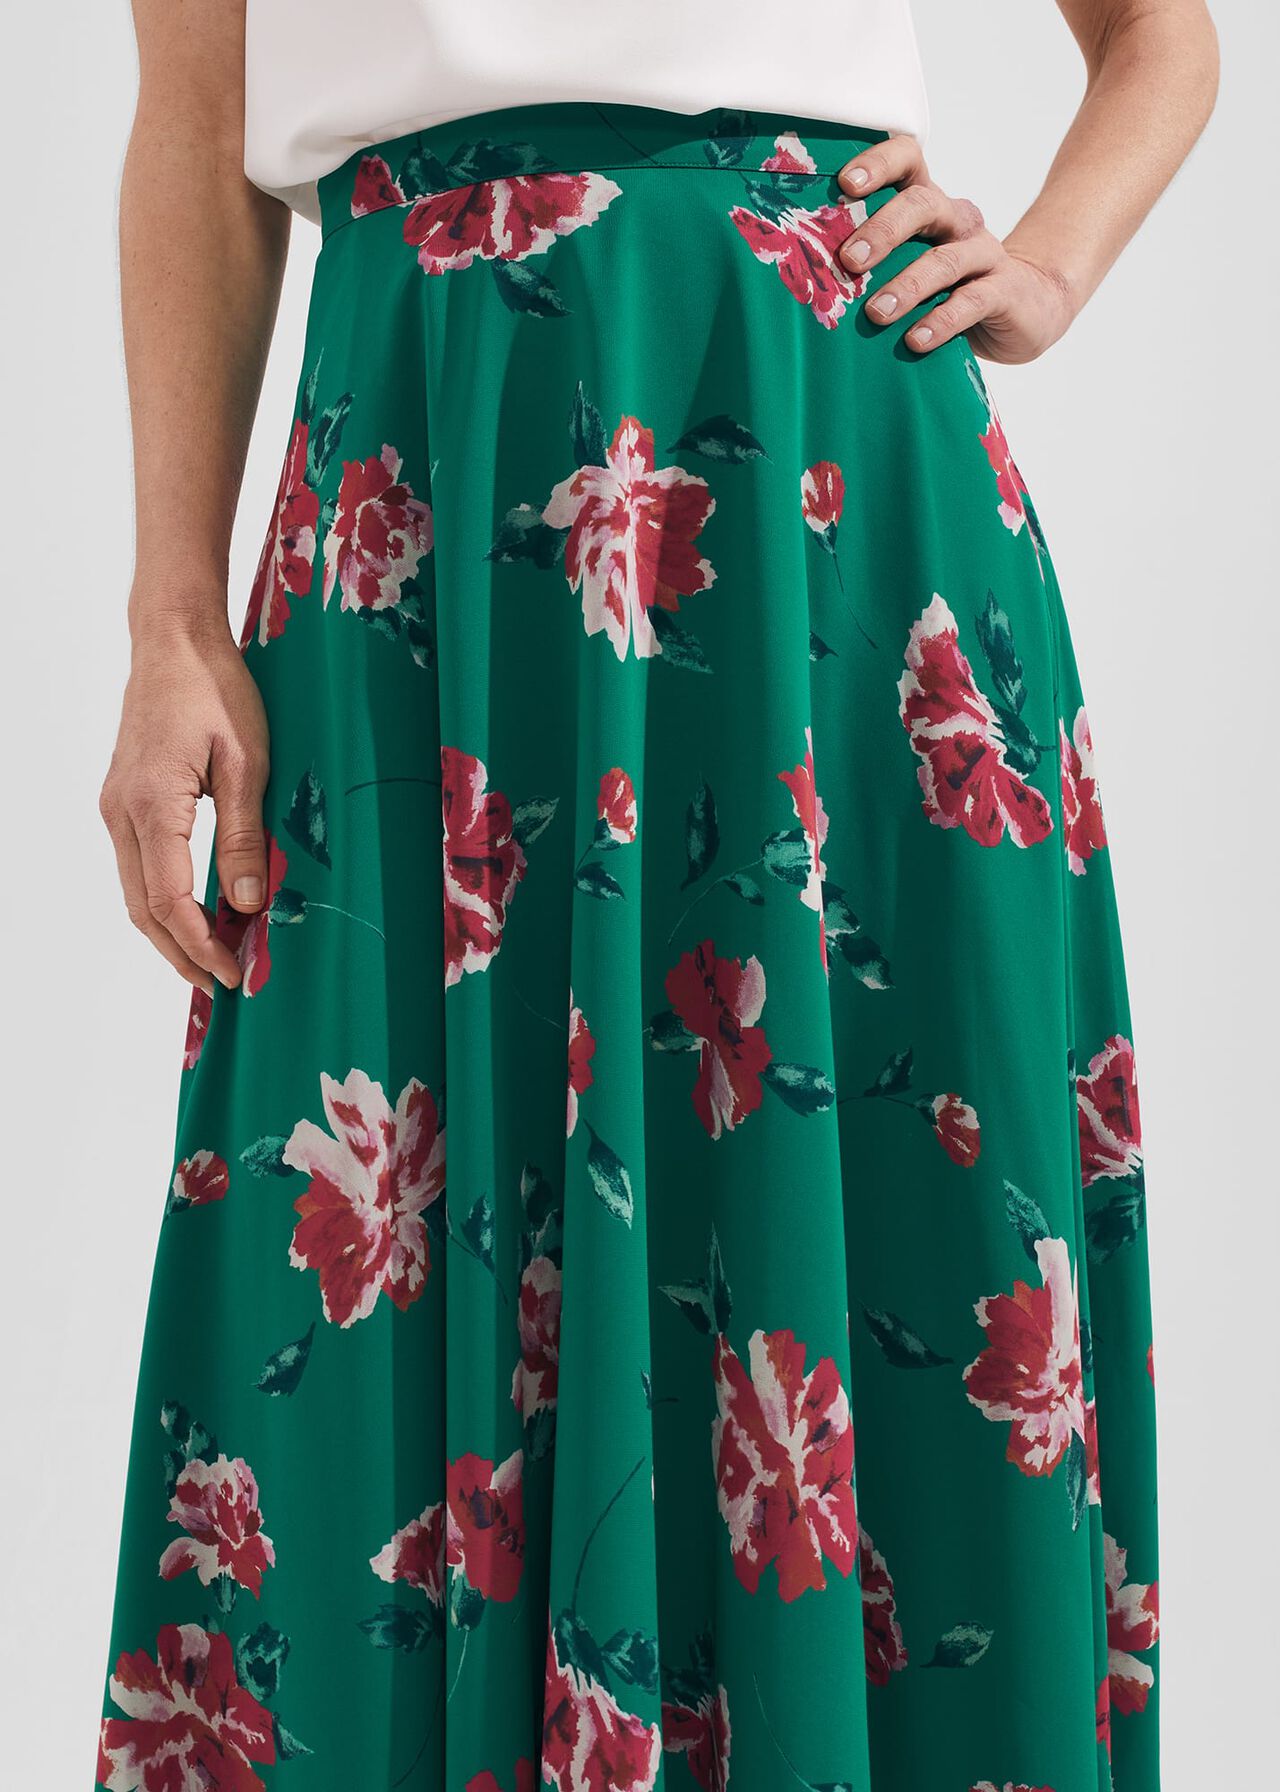 Carly Floral A Line Skirt, Green Multi, hi-res